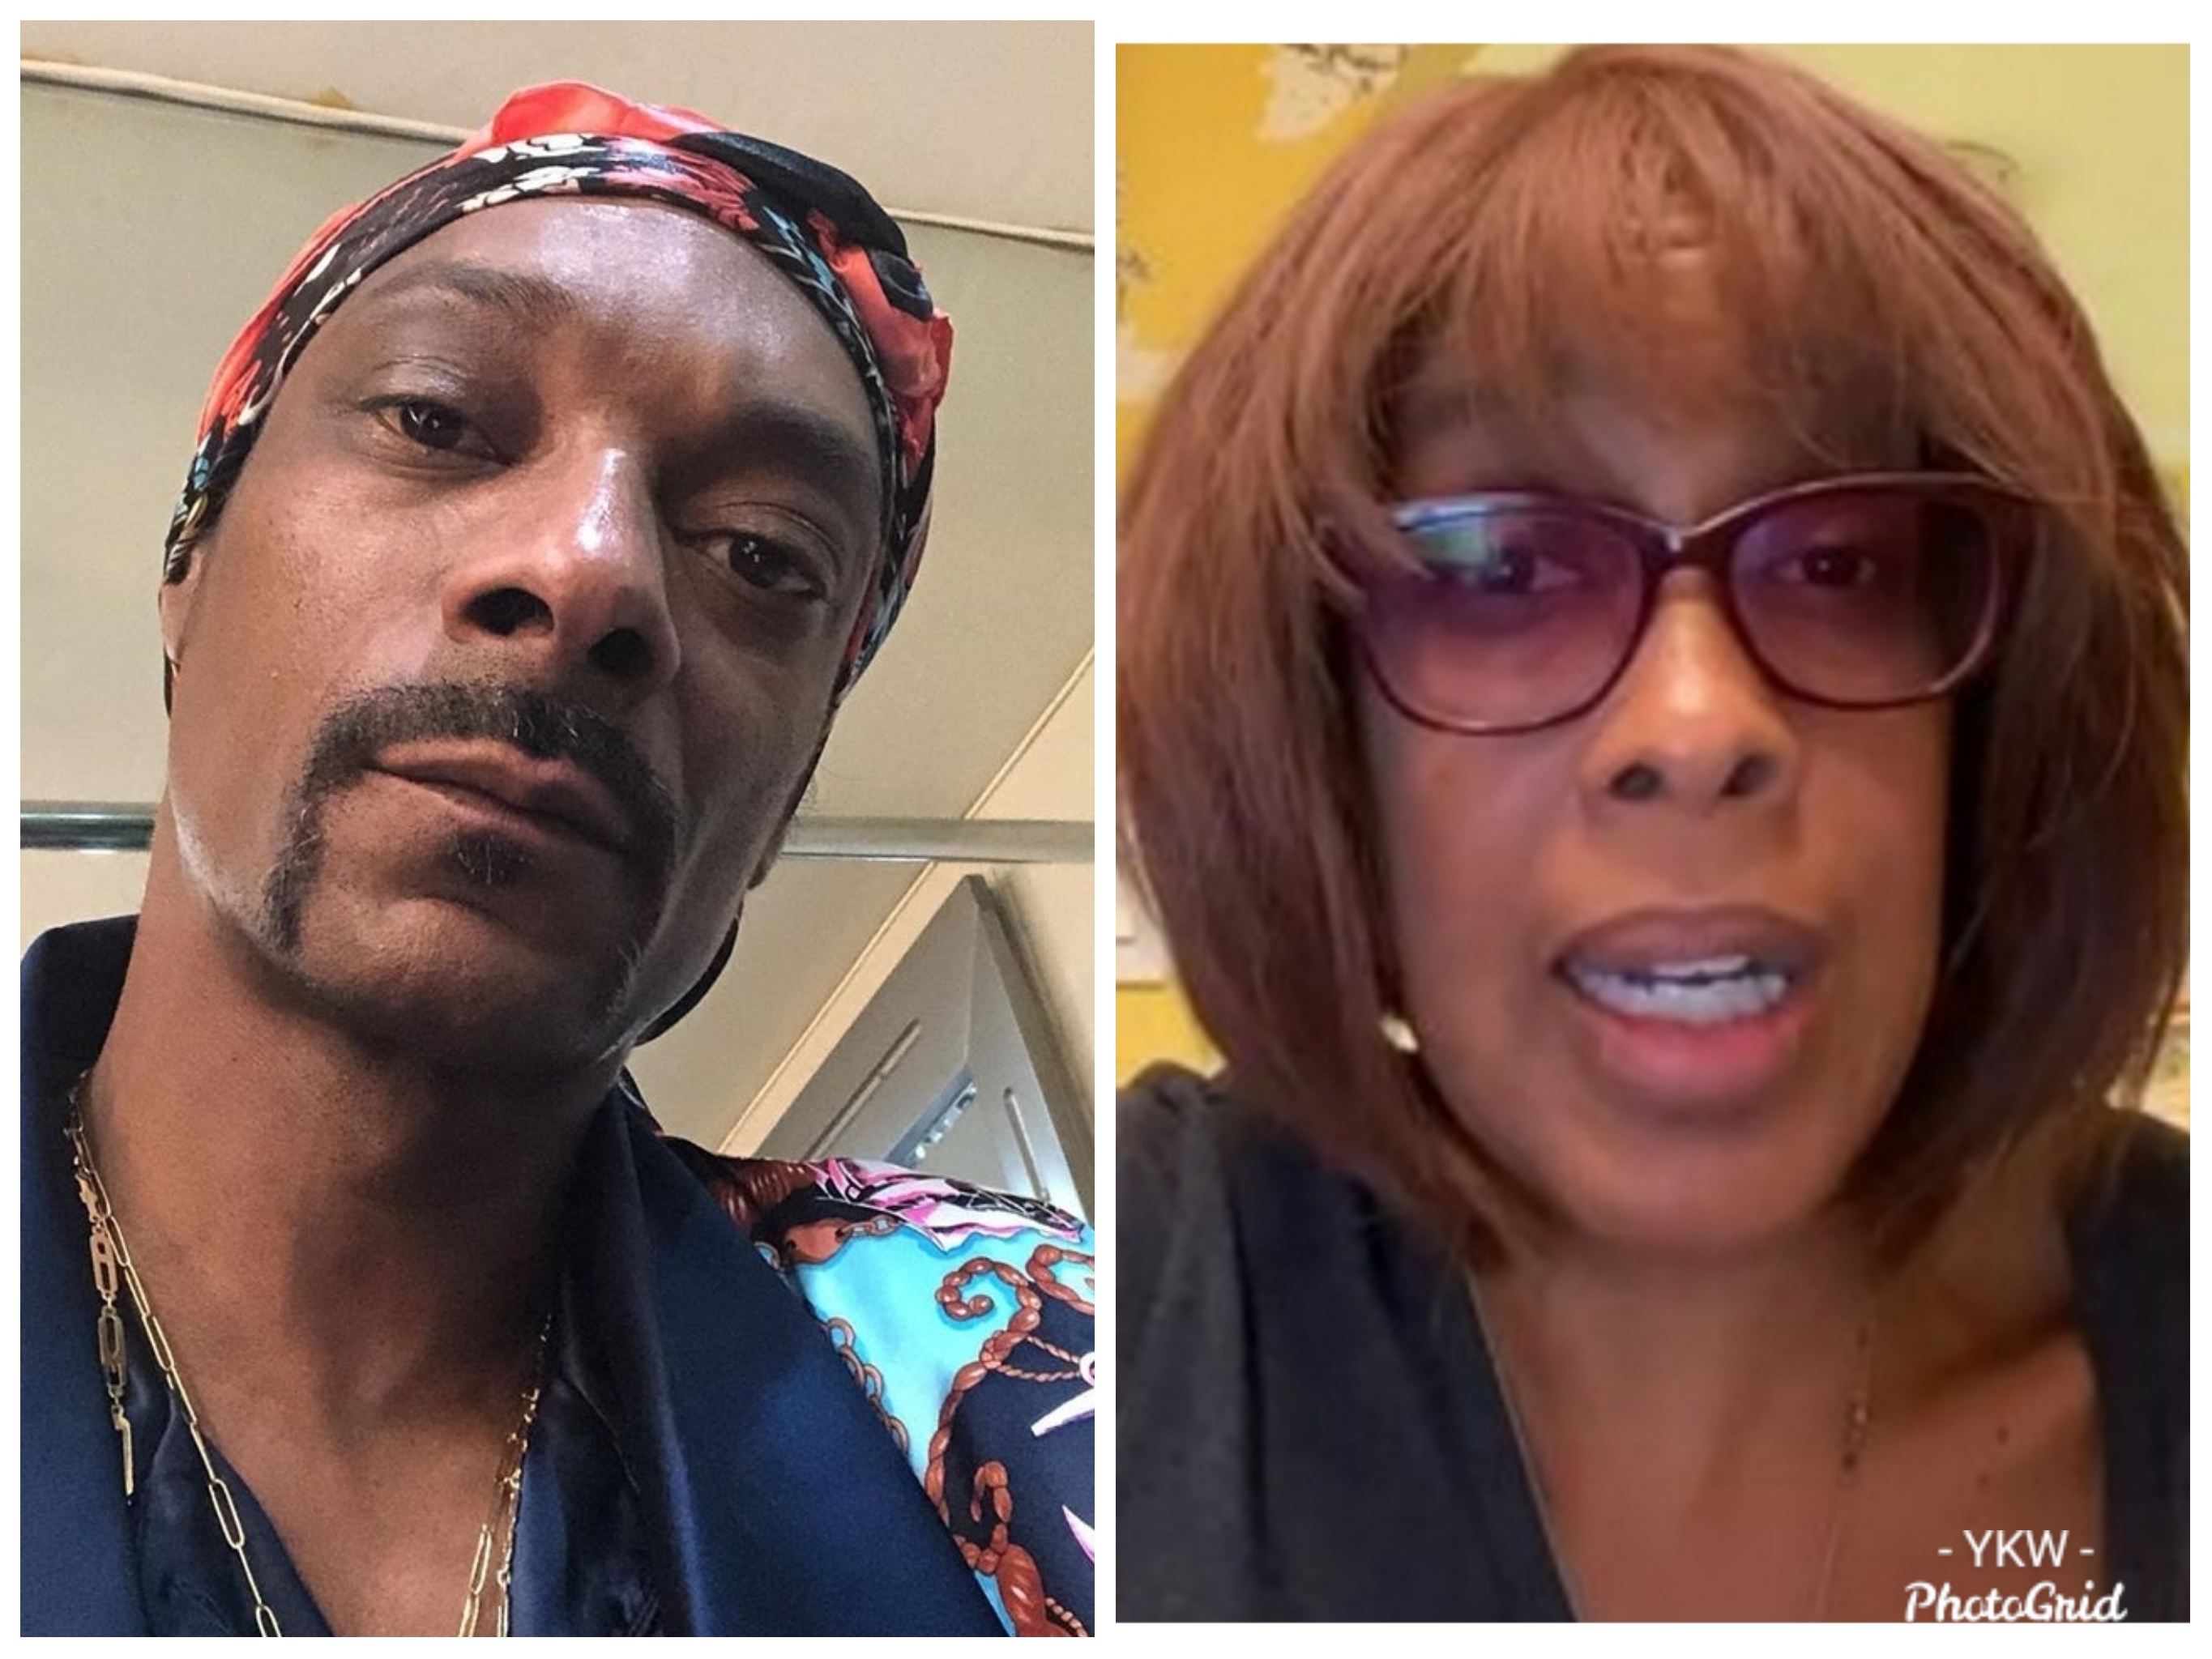 “2 Wrongs Don’t Make It Right:” Snoop Dogg Publicly Apologizes To Gayle King